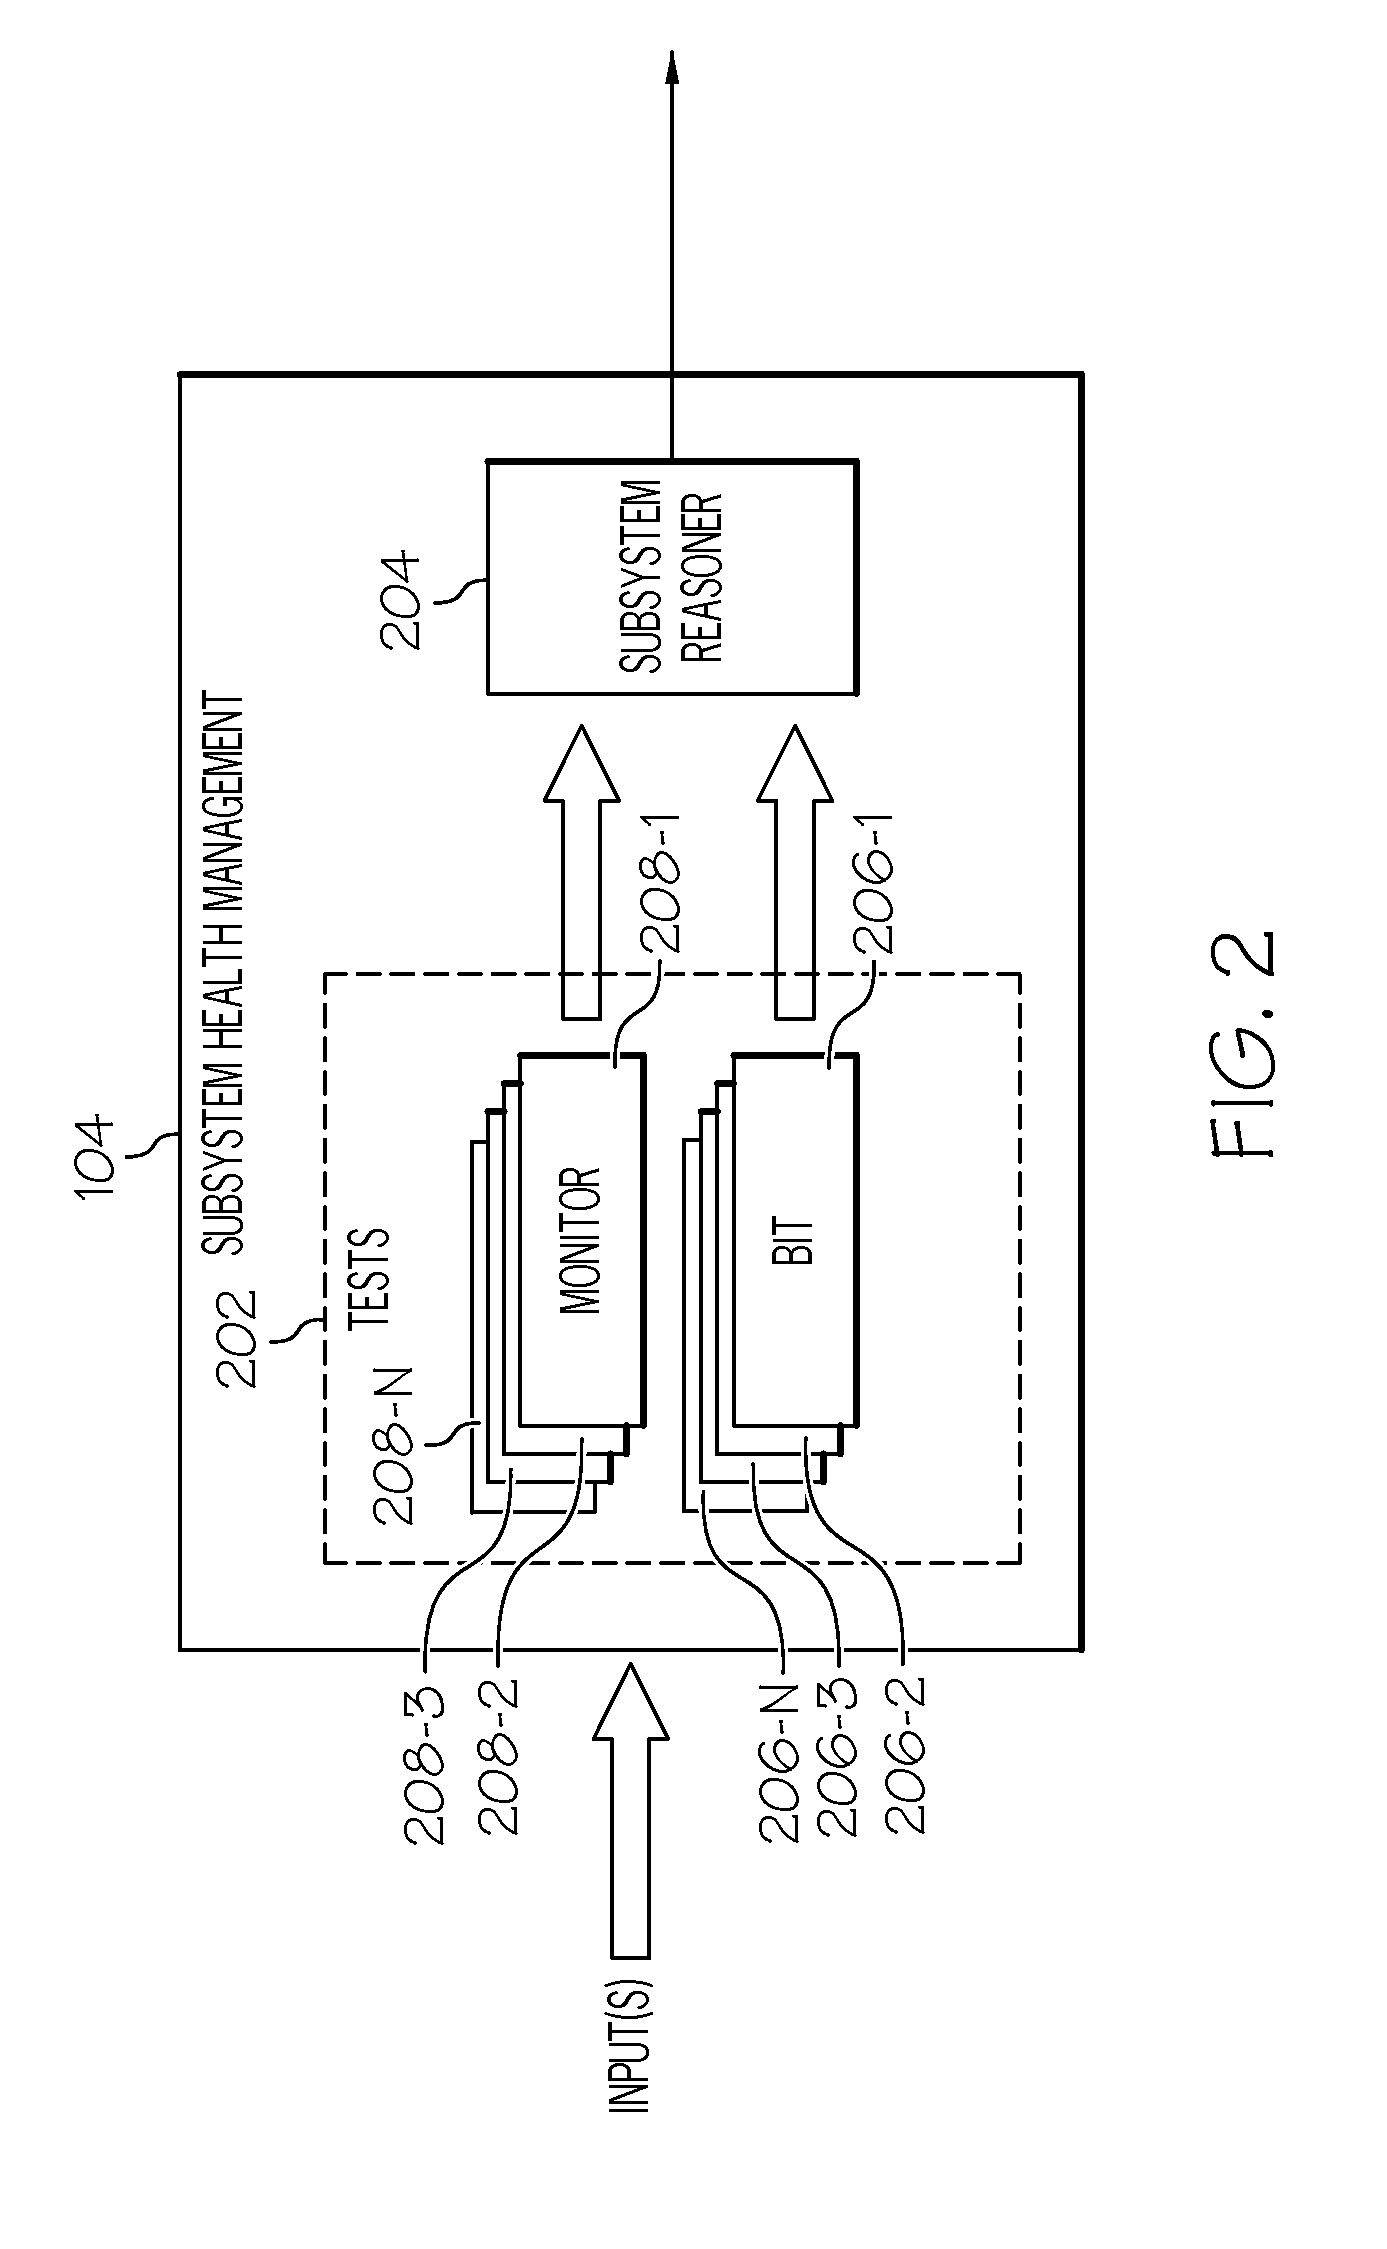 Initated test health management system and method